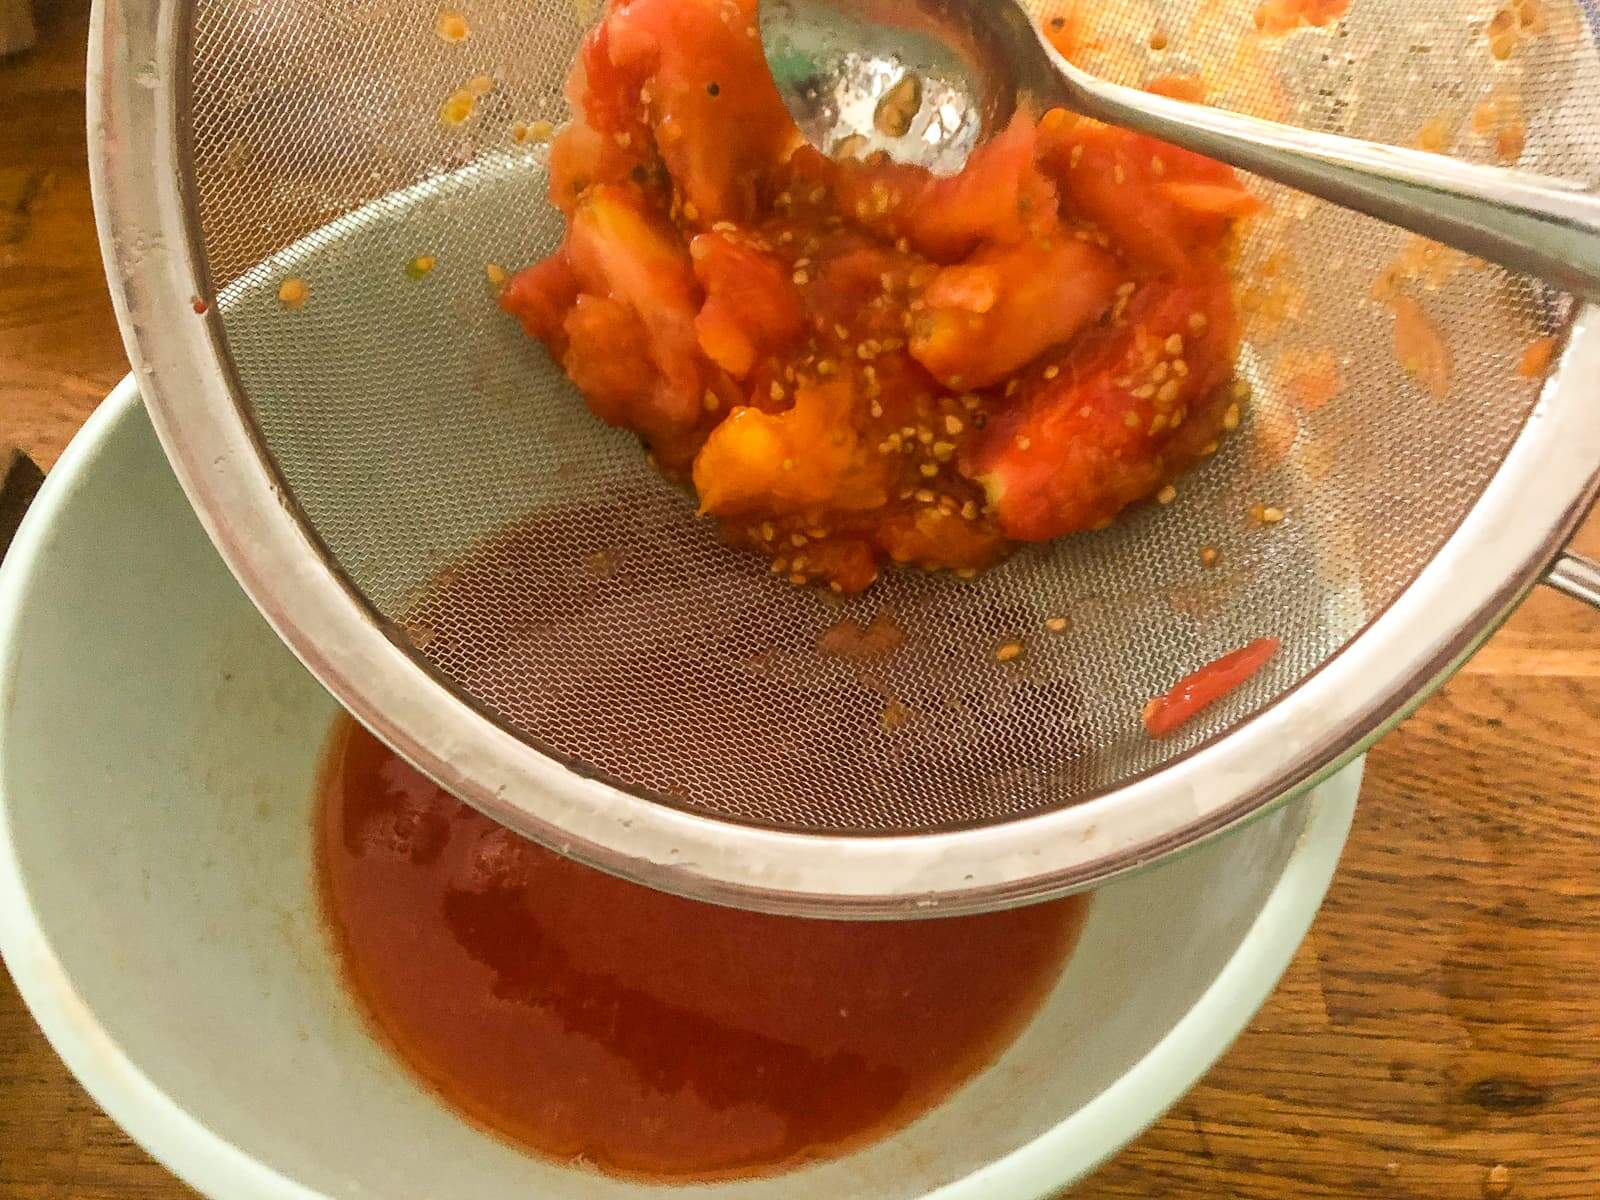 Fresh tomatoes being sieved through a fine strainer to collect the fresh juice.